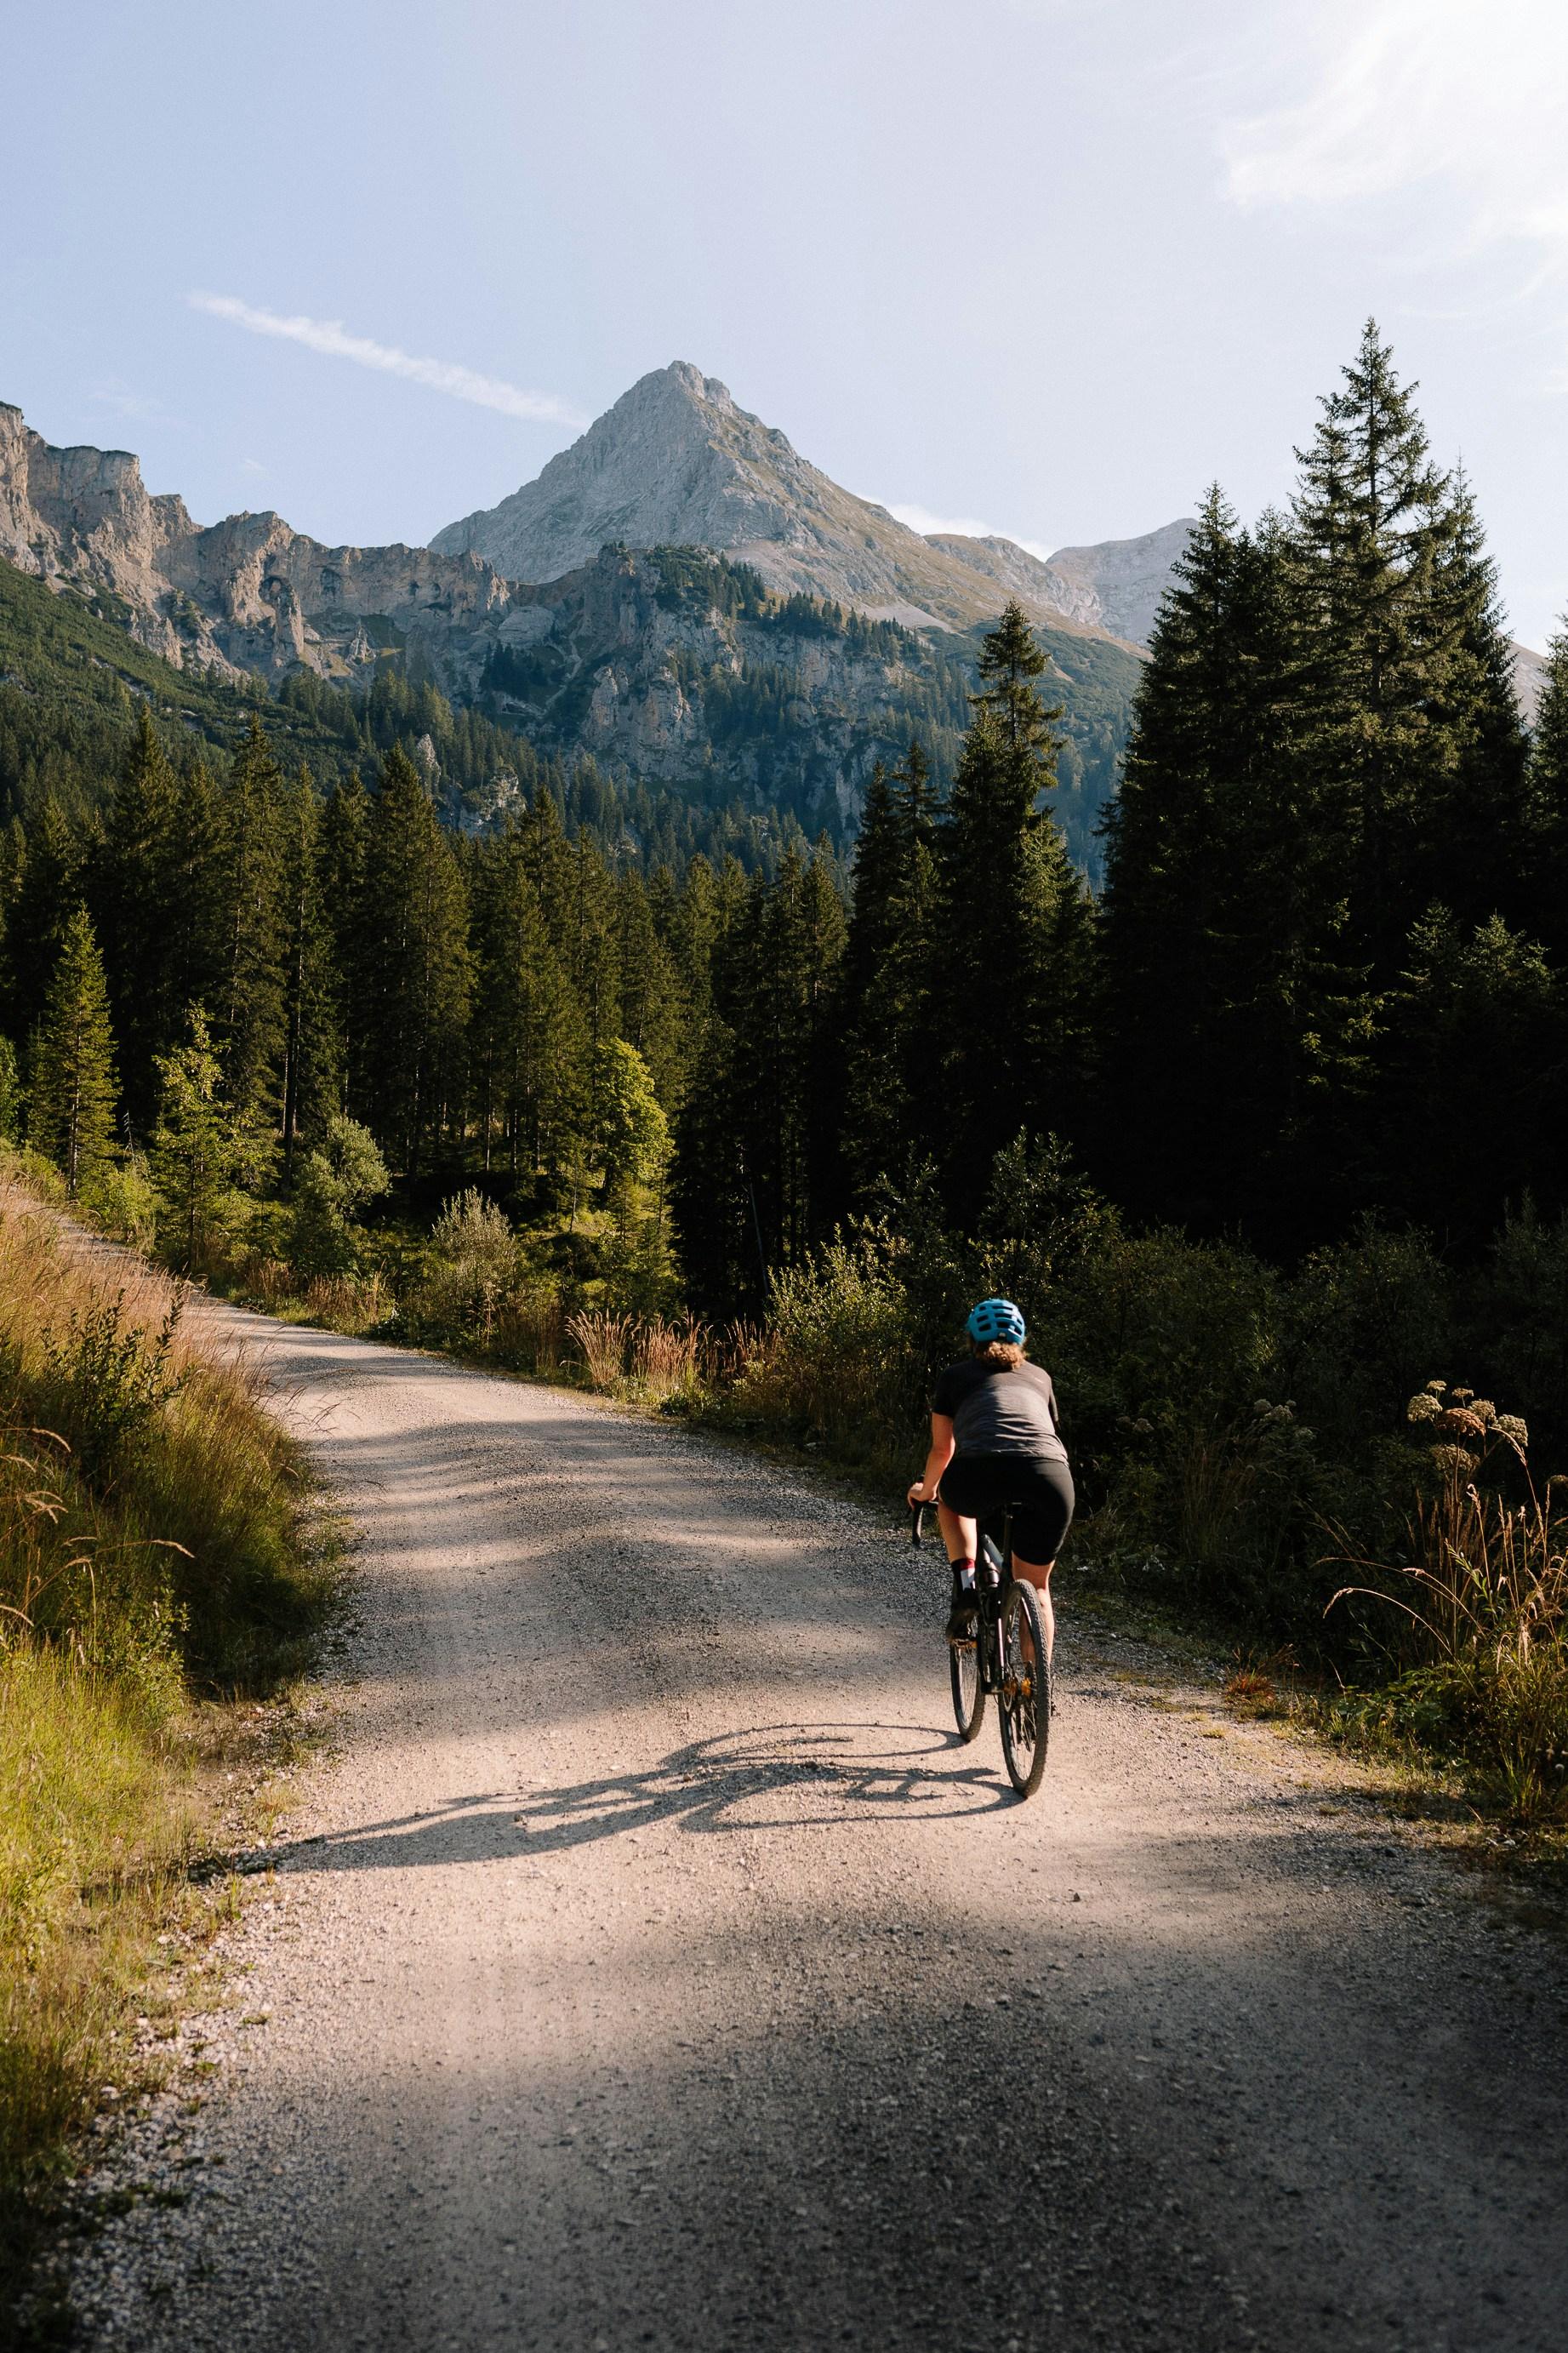 A woman on a gravel ride with a mountainous backdrop. Photo by Axel Brunst (via Unsplash)